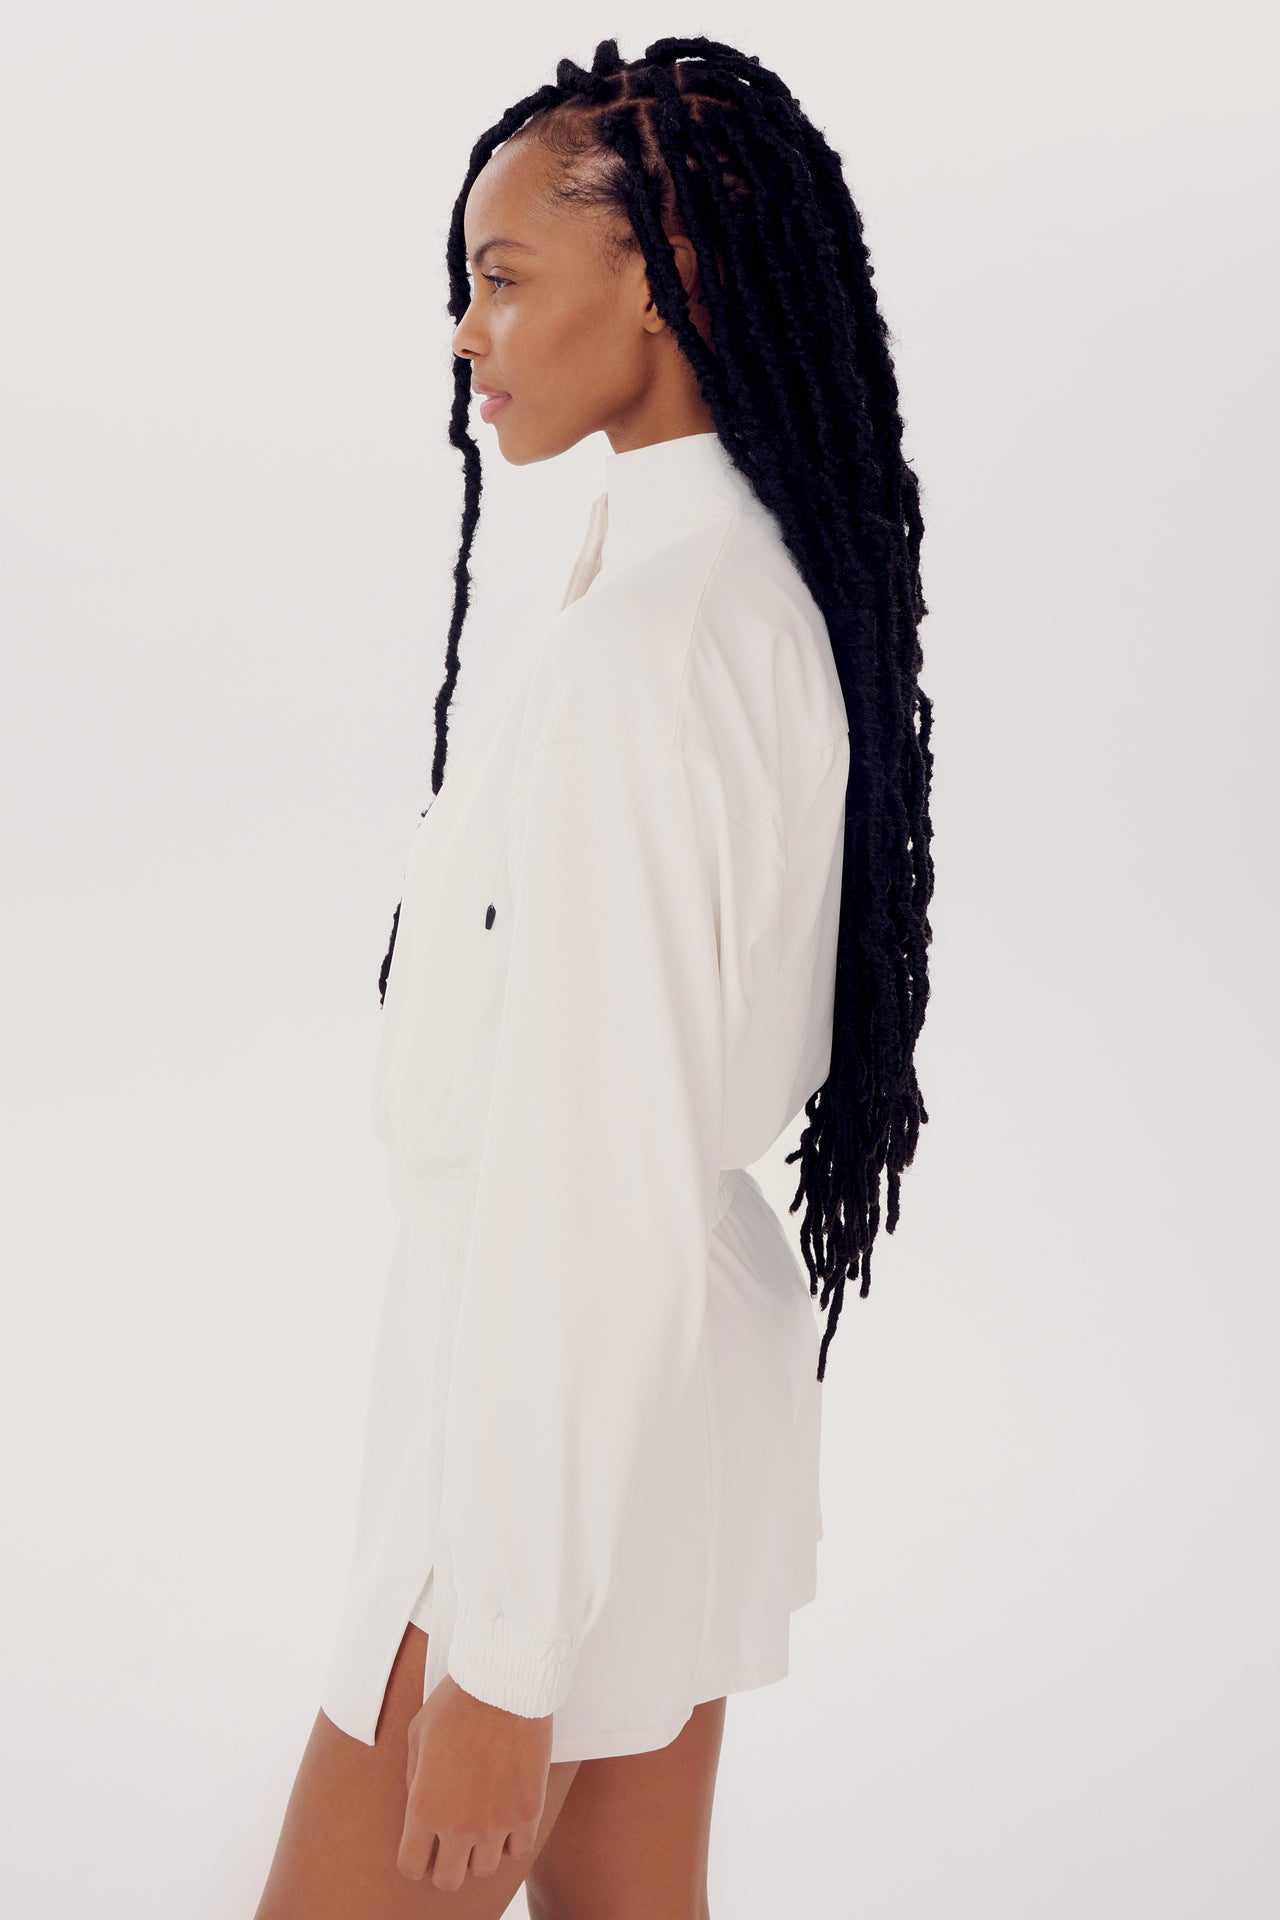 Sentence with replaced product:

Profile view of a woman with long braids wearing a SPLITS59 Harlowe Rigor Jacket in White against a plain background.